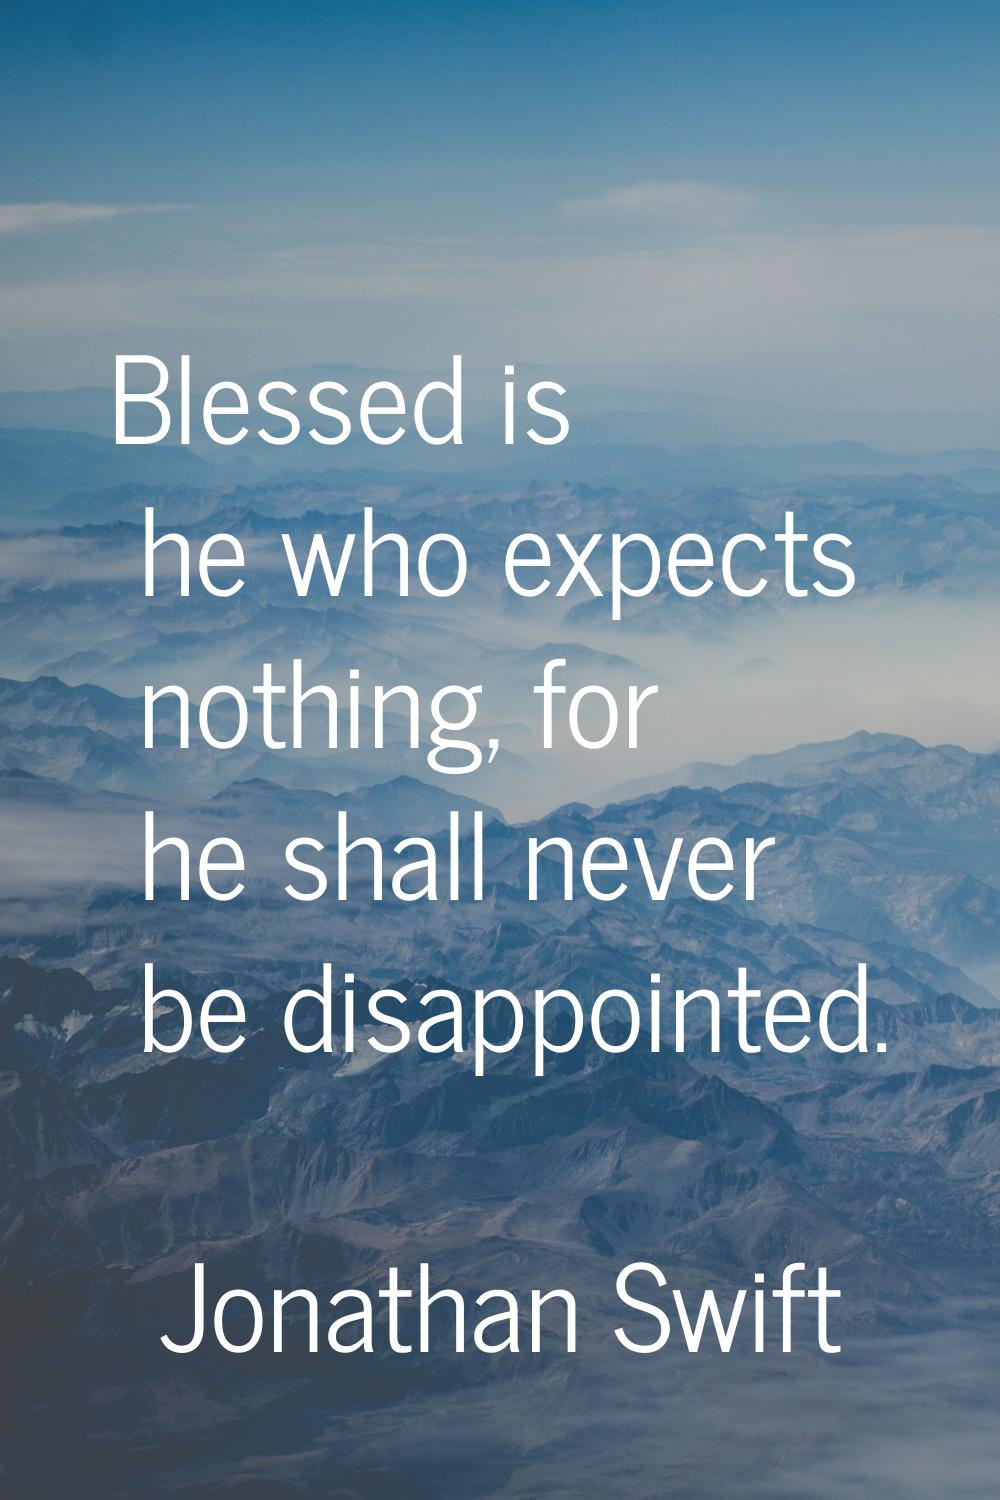 Blessed is he who expects nothing, for he shall never be disappointed.